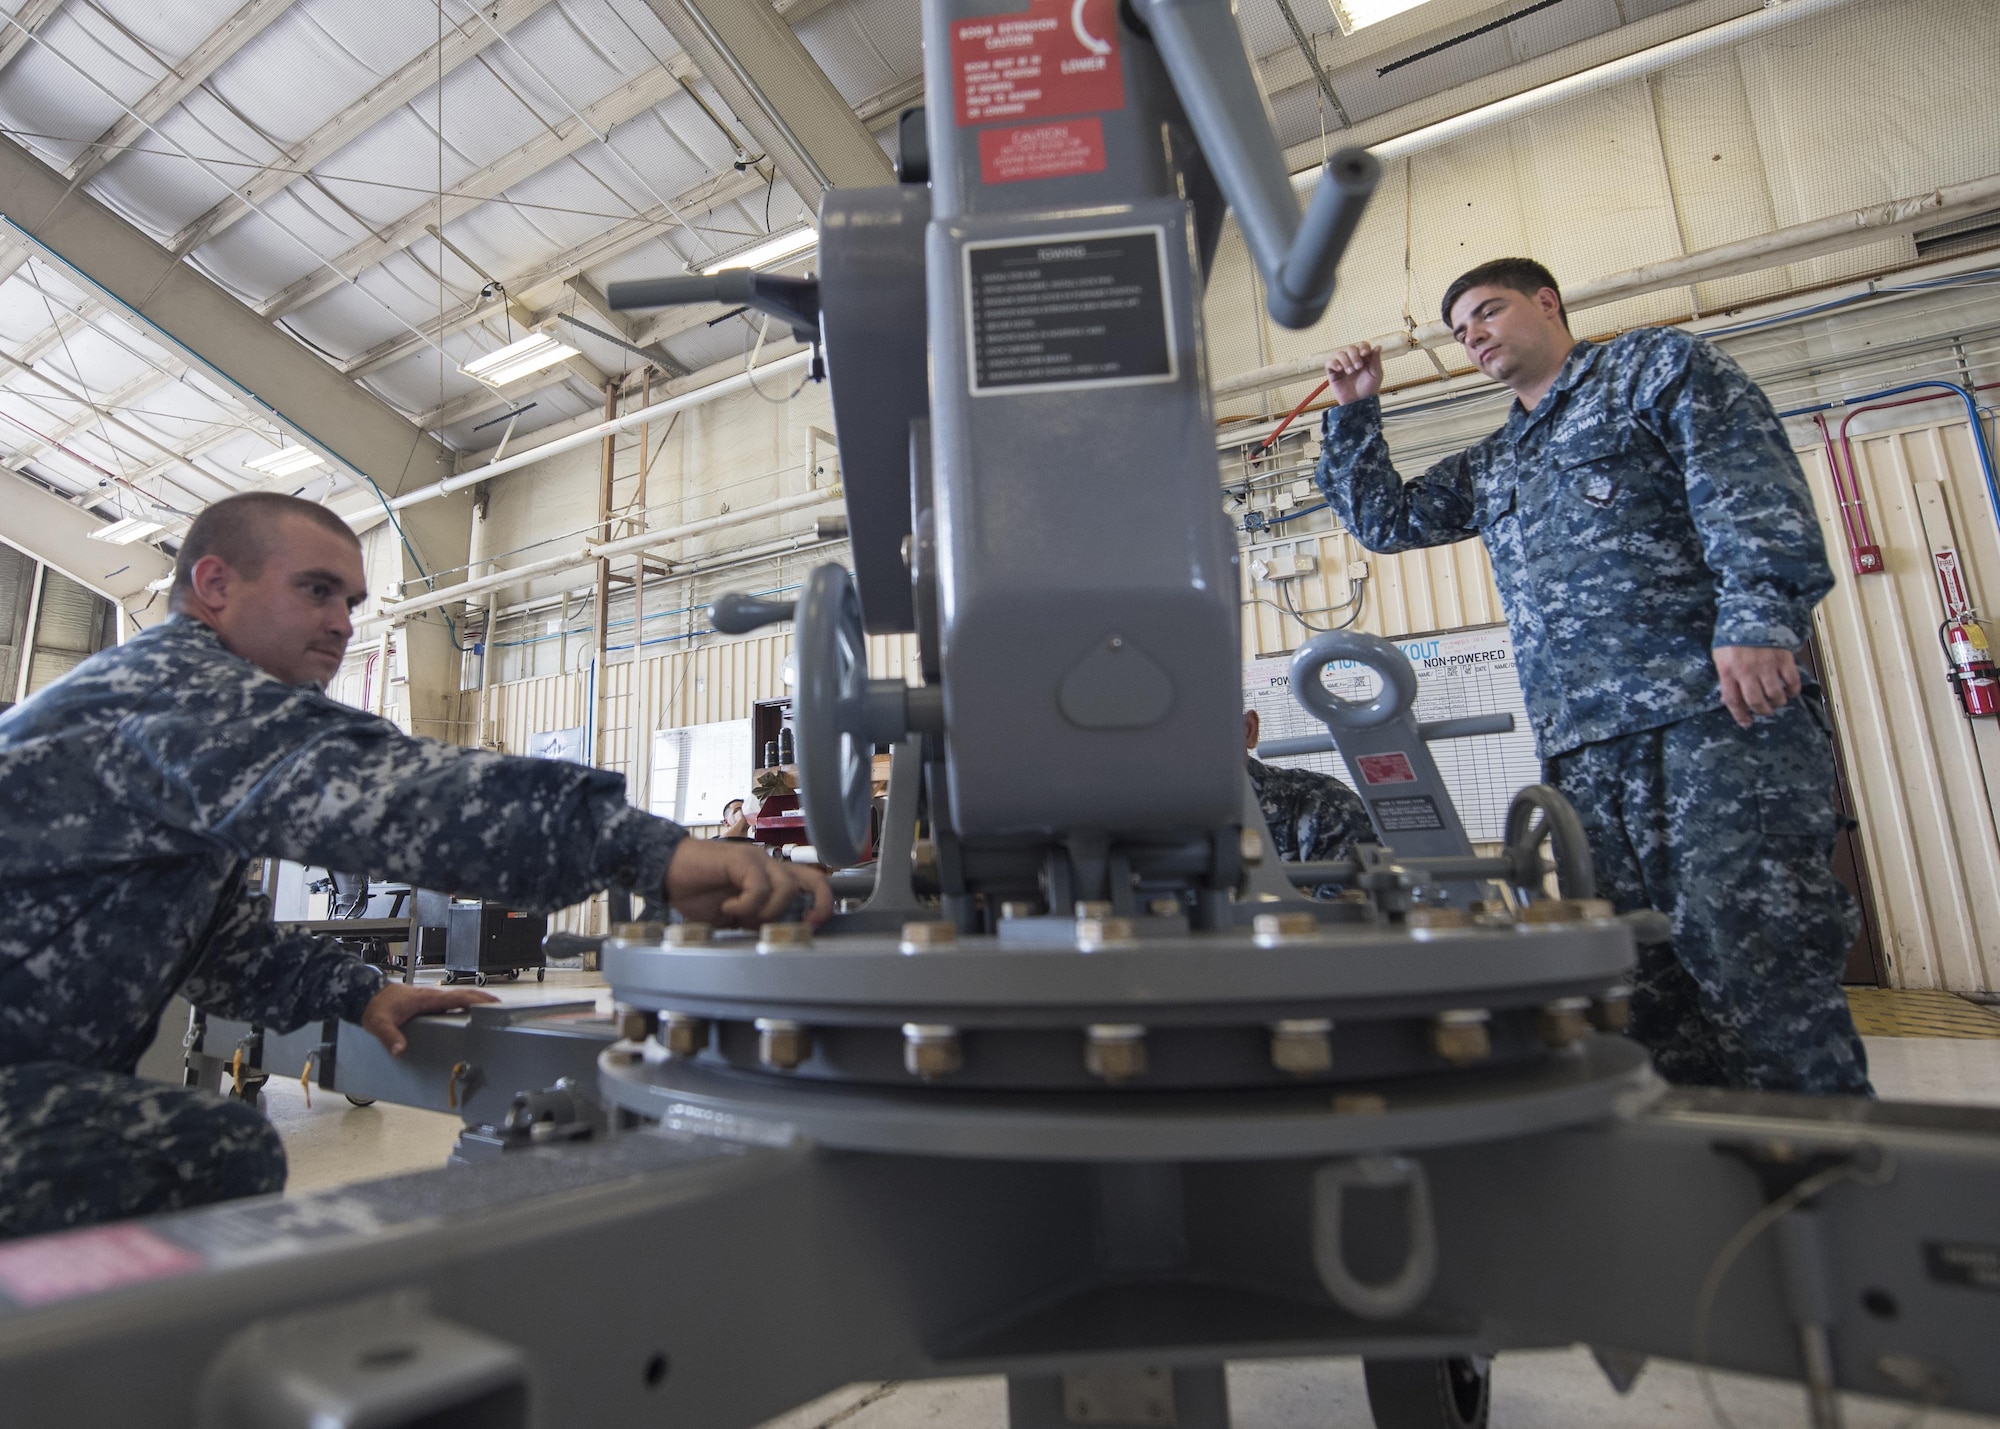 U.S. Navy Aviation Support Equipment Technician Second Class Eric Stark, right, 33rd Maintenance Squadron Aerospace Ground Equipment, demonstrates how to operate a portable floor crane for Aviation Support Equipment Technician First Class Jerimiah Appel, USS Abraham Lincoln (CVN-72), Aug. 9, 2017, at Eglin Air Force Base, Fla. Appel is one of two AS1s who are receiving "Phase 1" initial training for F-35 support systems from the 33rd MXS. The information he is learning will be used to operate and maintain the machines that supply electricity, air pressure and hydraulic pressure to the aircraft when the engine is not running. (U.S. Air Force photo by Staff Sgt. Peter Thompson)